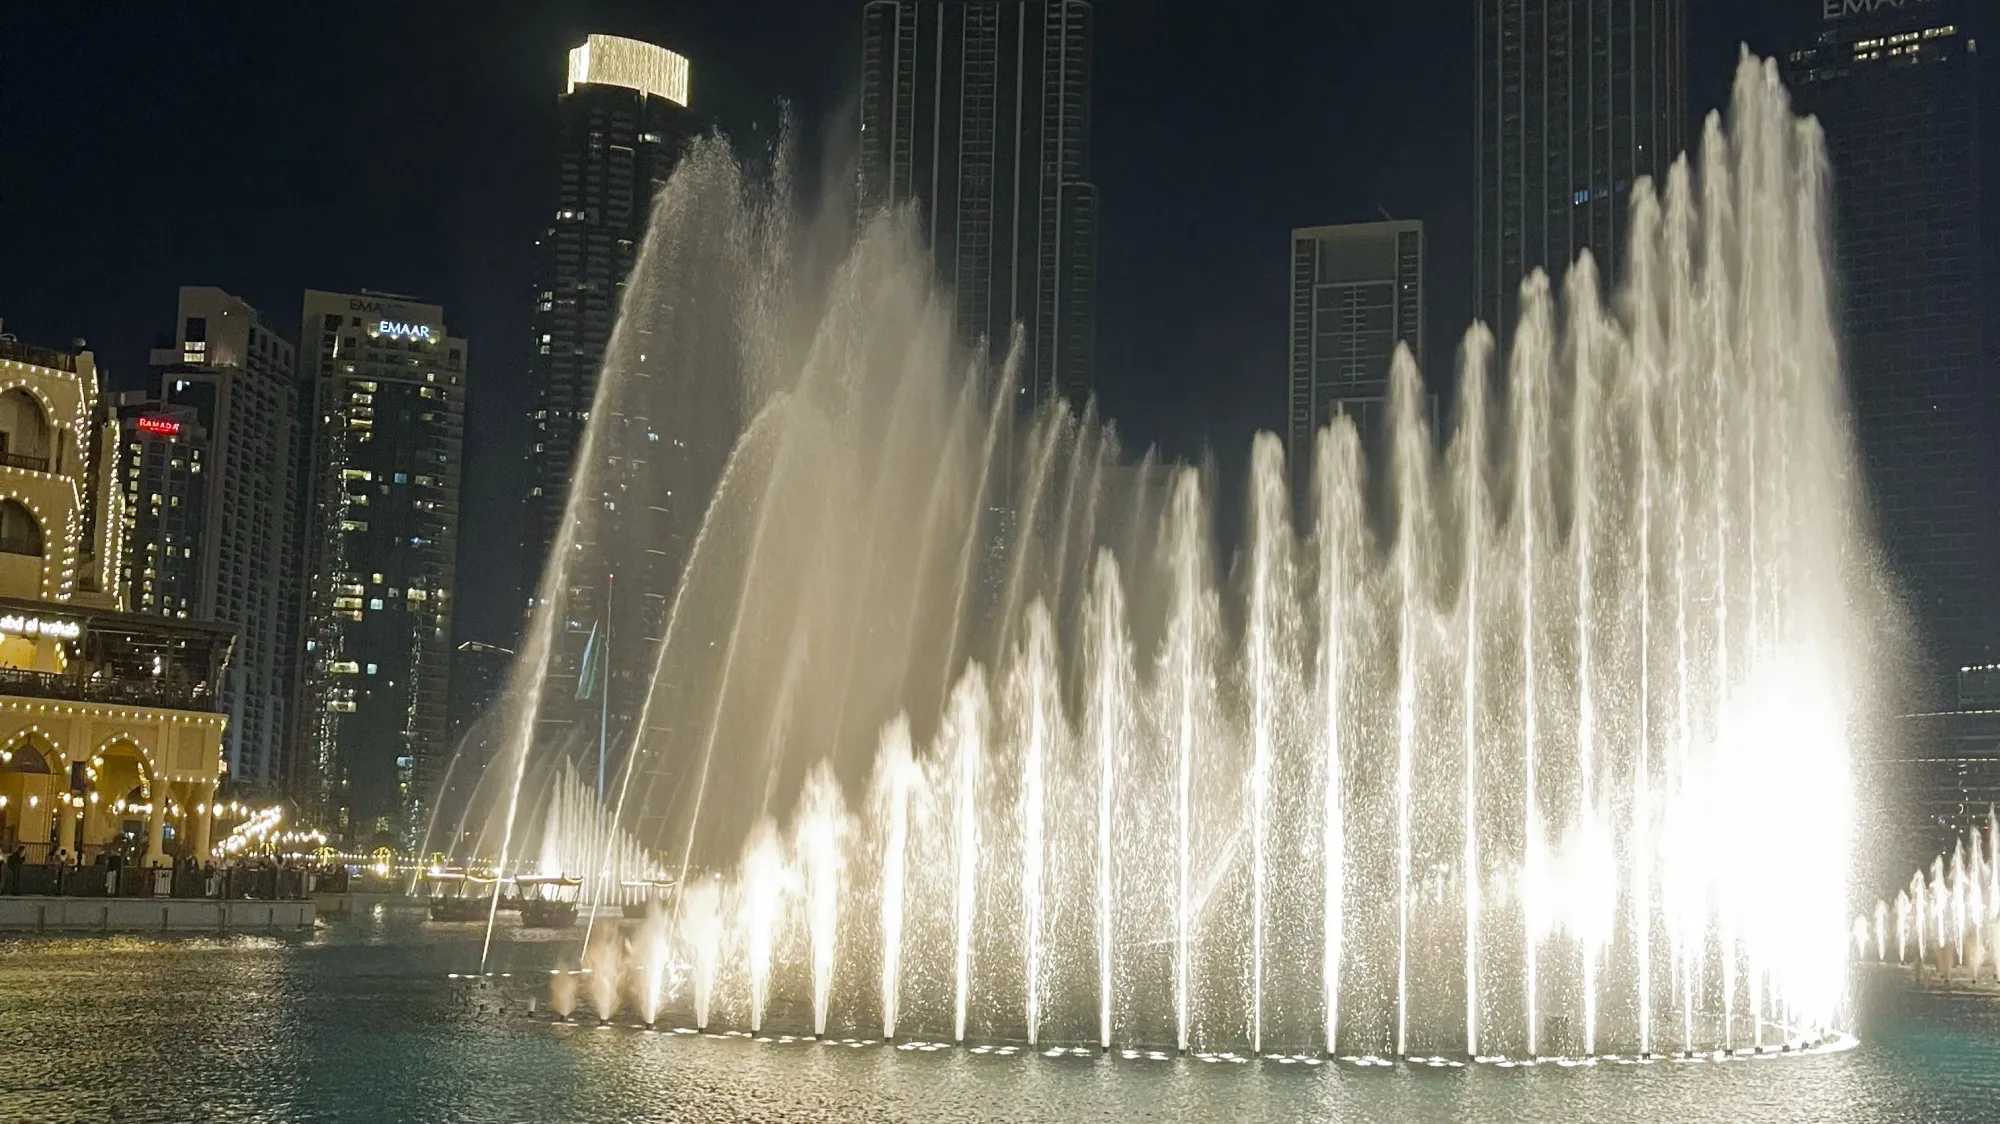 Fountain heads arranged in a circle spraying water vertically in succession